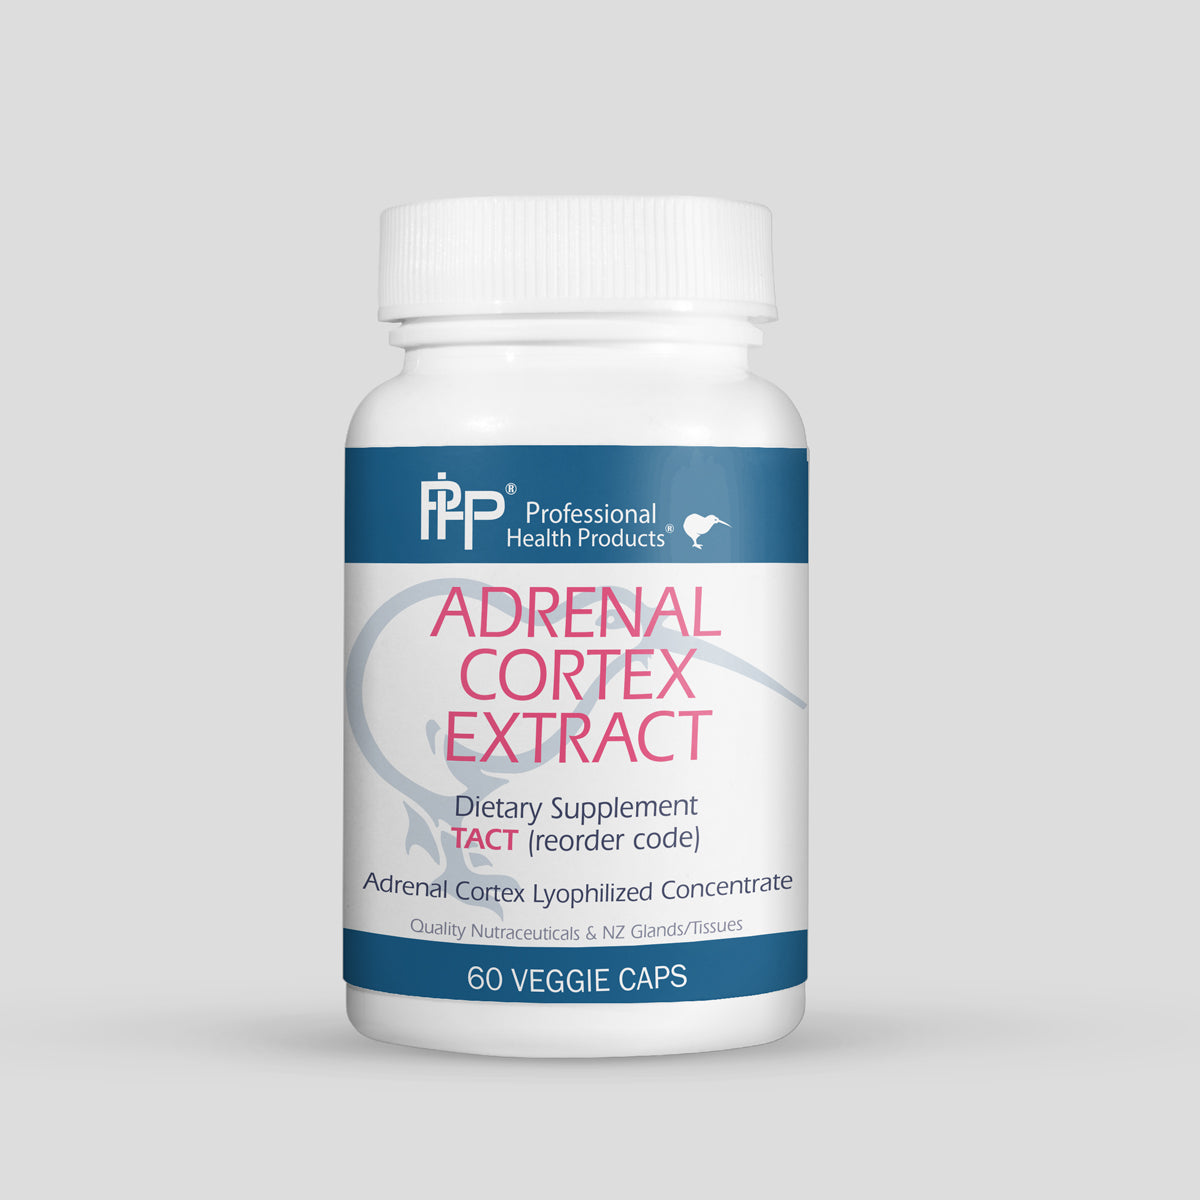 Adrenal Cortex Extract - LaValle Performance Health